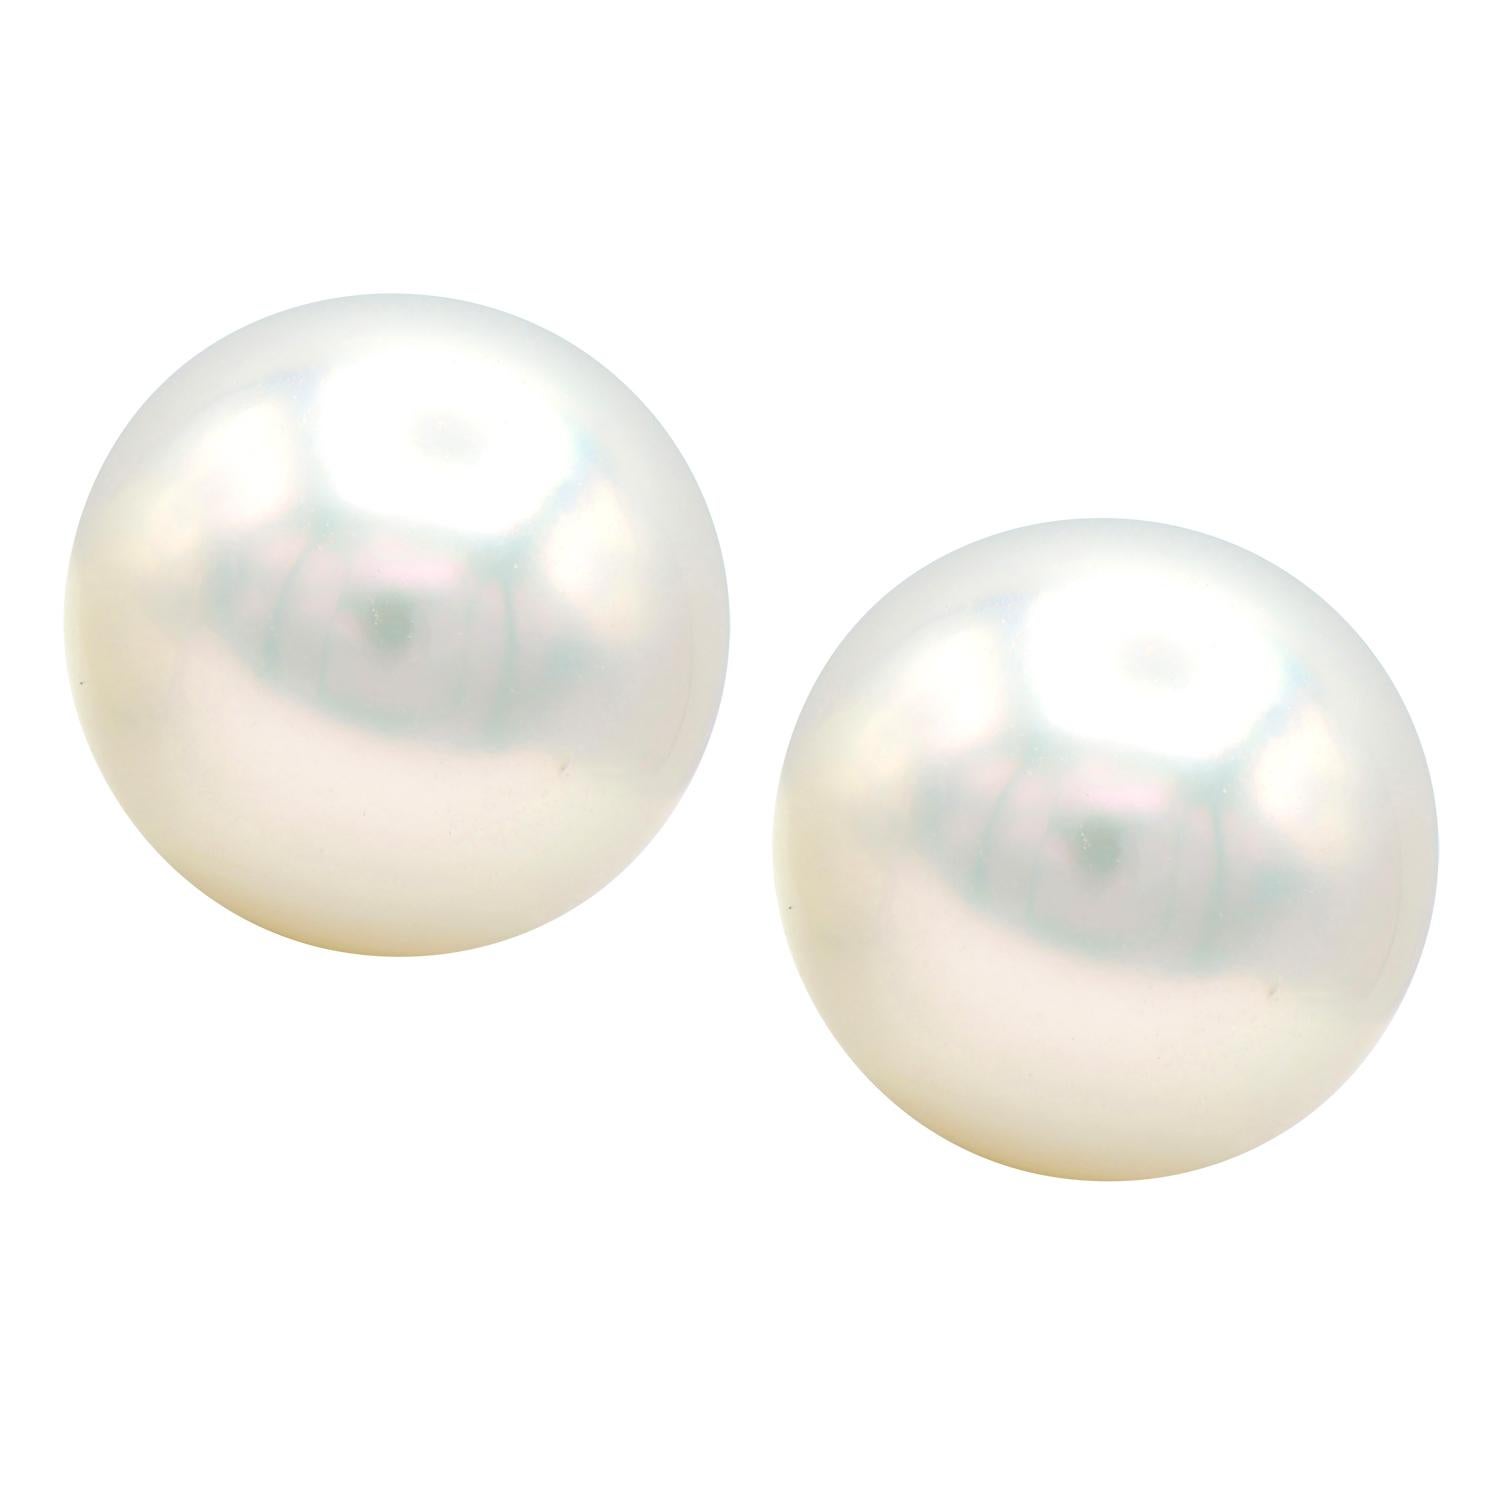 Round Cut 10.5-11mm South Sea Pearl Stud Earrings with 14 Karat White Gold Posts and Backs For Sale